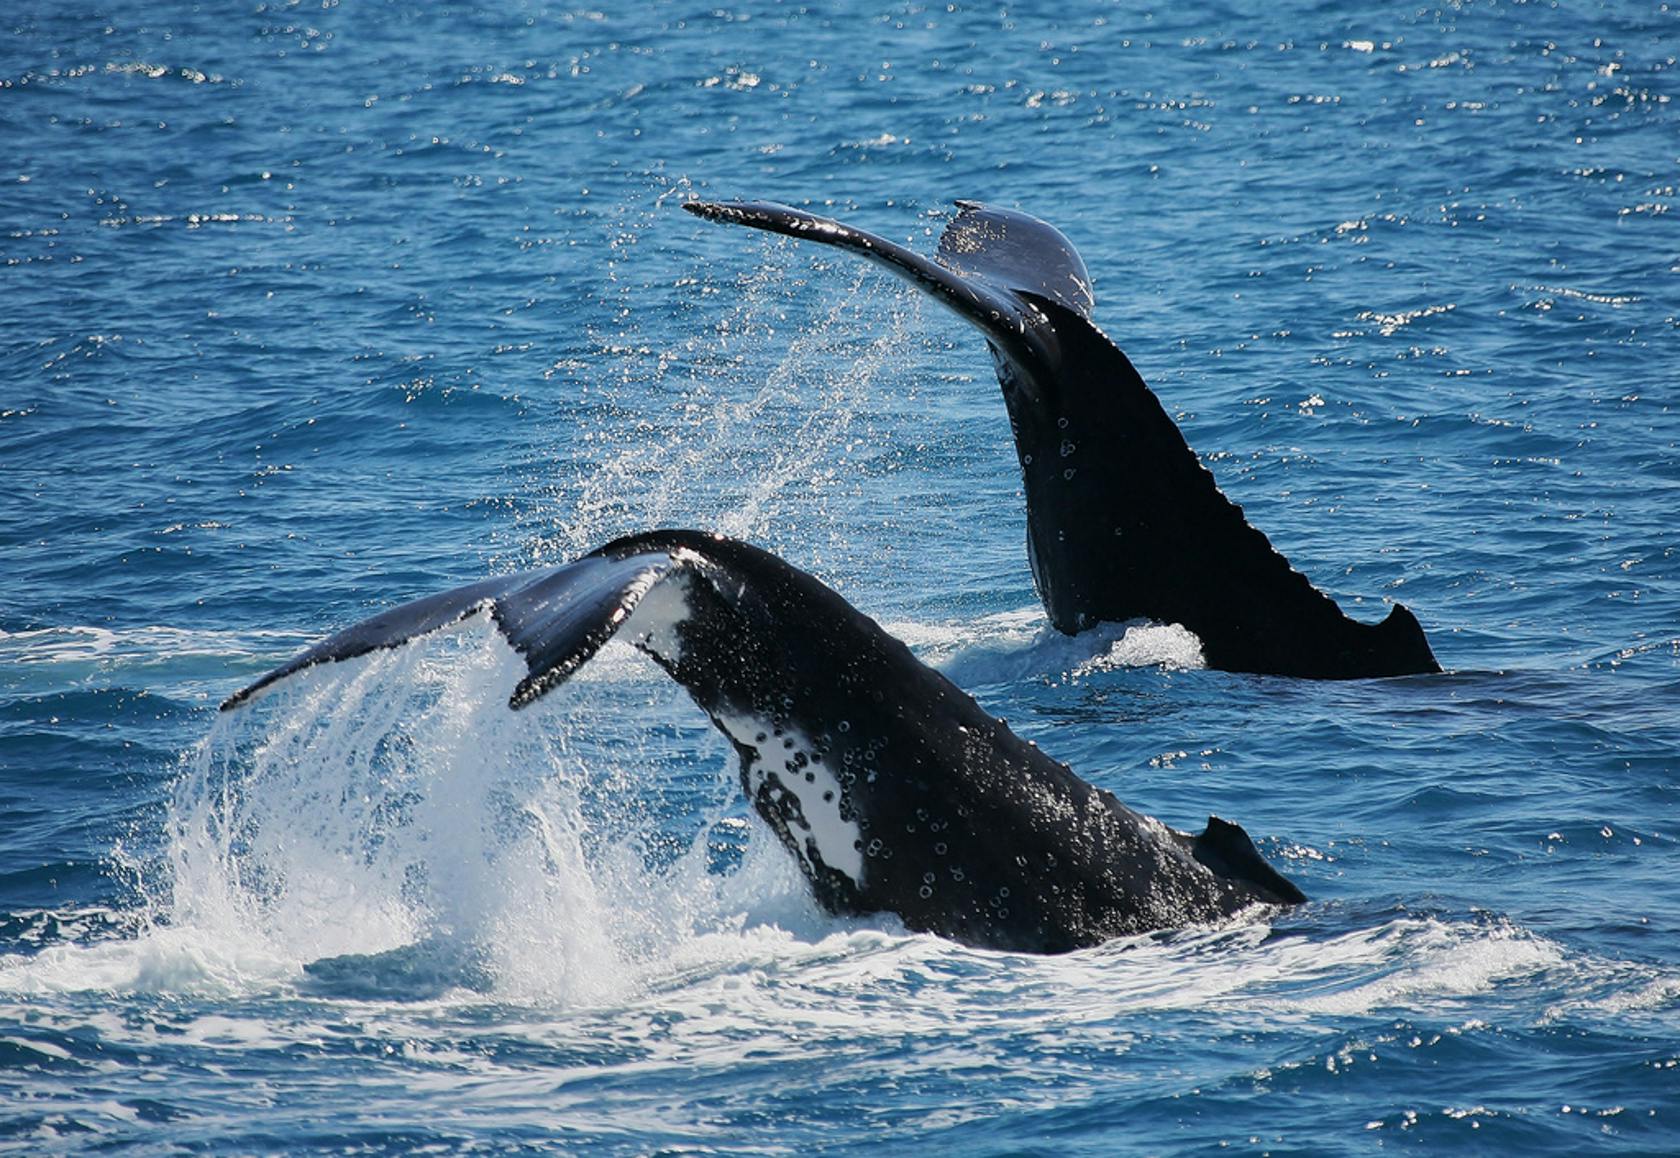 Whale watching tours in Hervey Bay